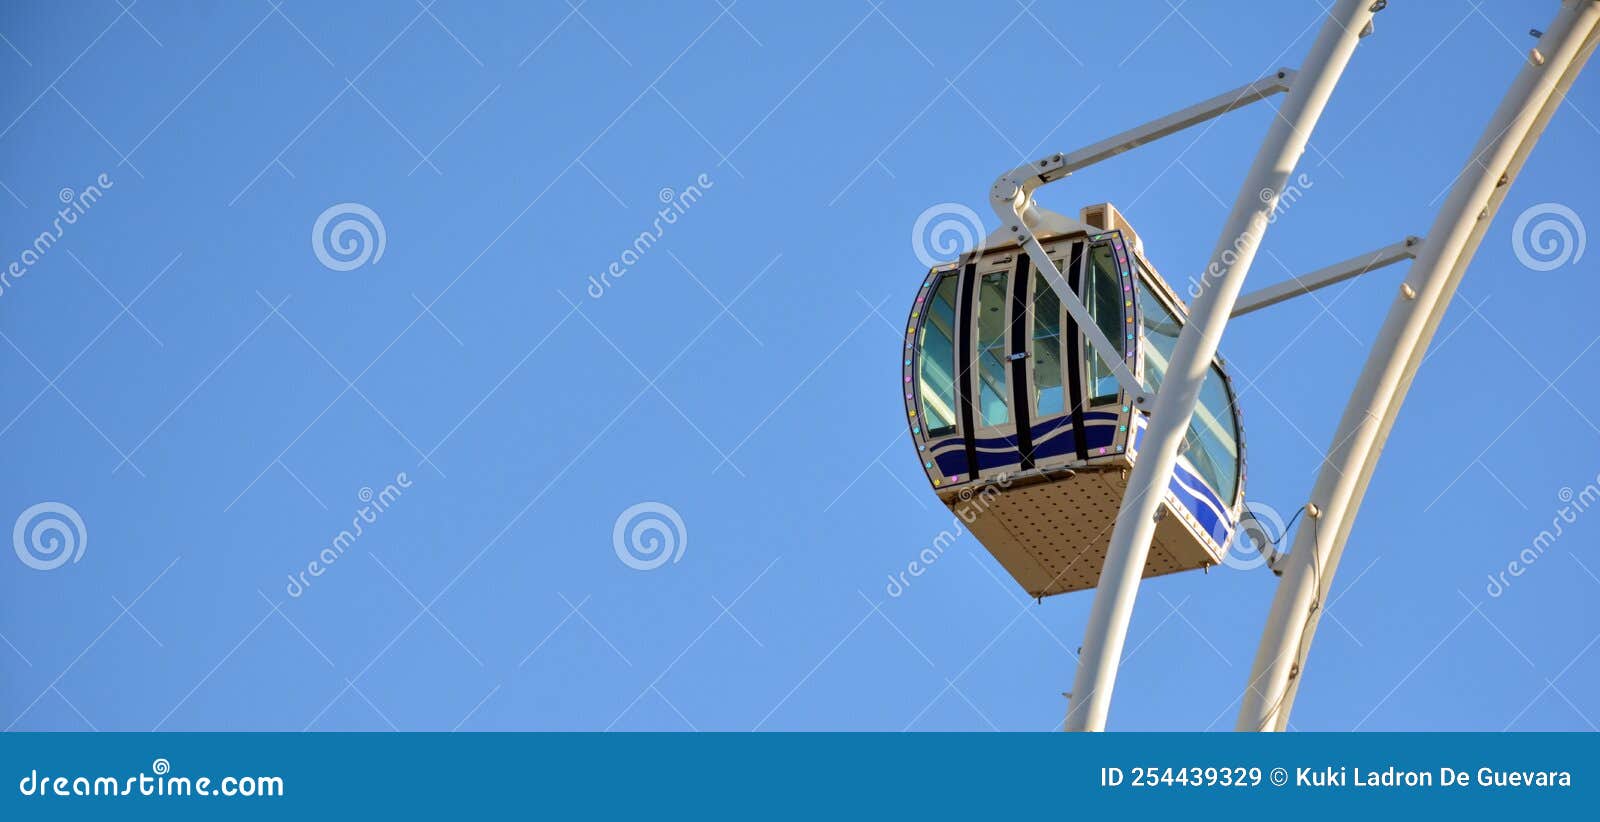 detail of some cabins of a ferris wheel